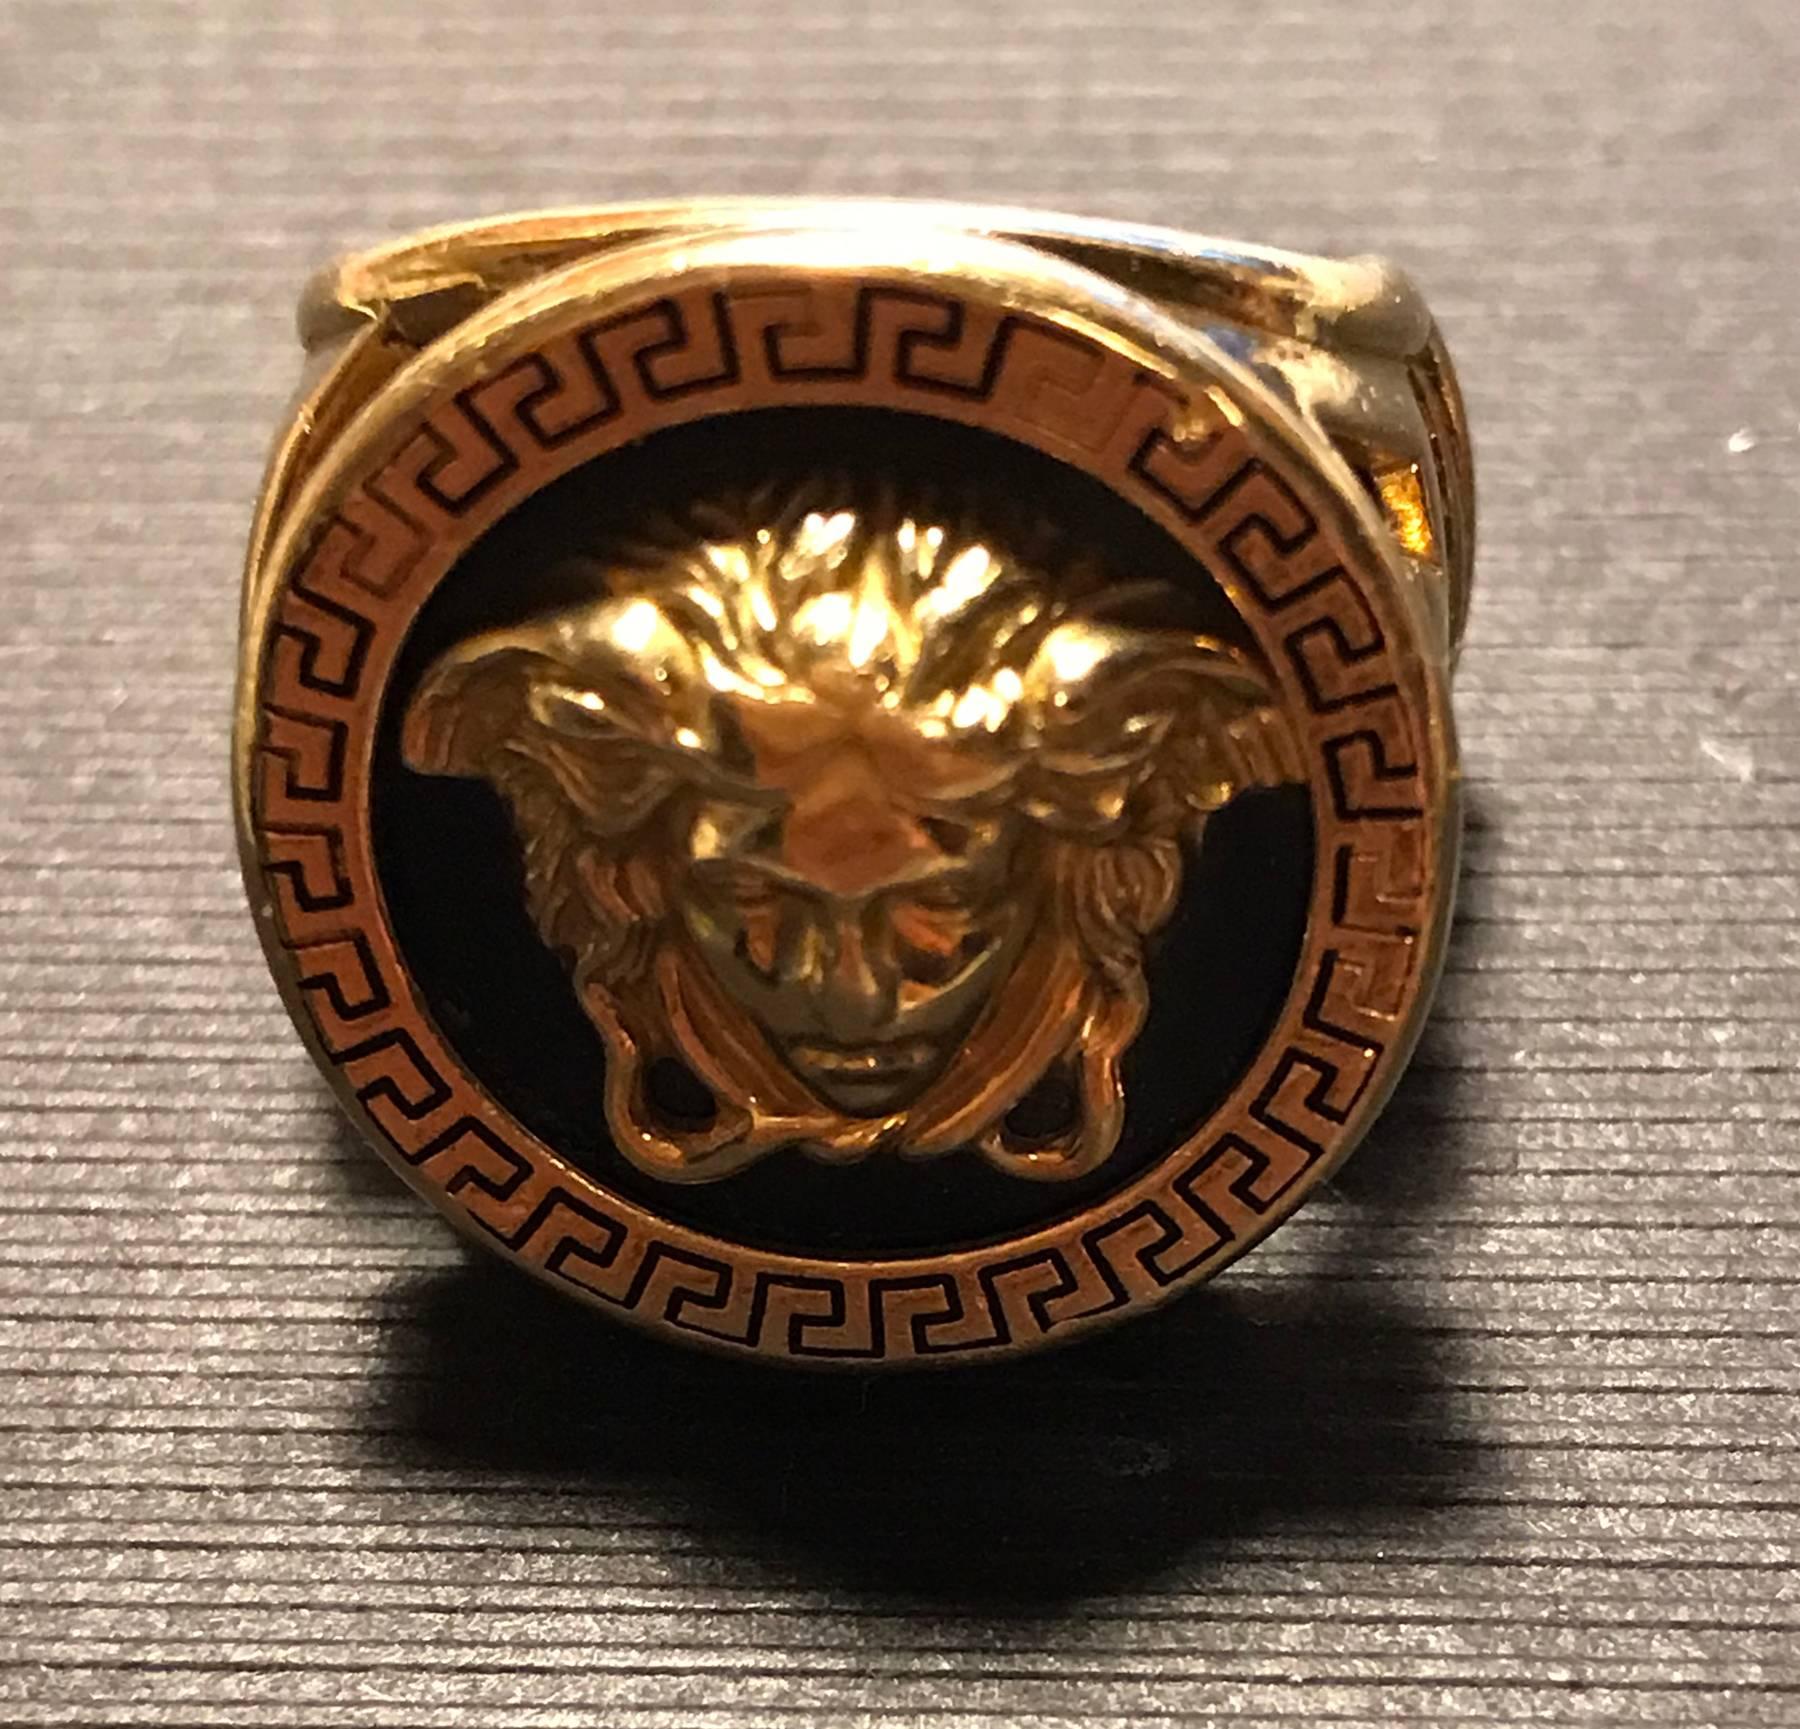 Signet 18k gold ring with the Medusa head over black enameled and a Greek fretwork carved all around as a frame. The ring has been professionally modified in the interior to fit a smaller finger, it consists of an extra inner gold ring welded to the